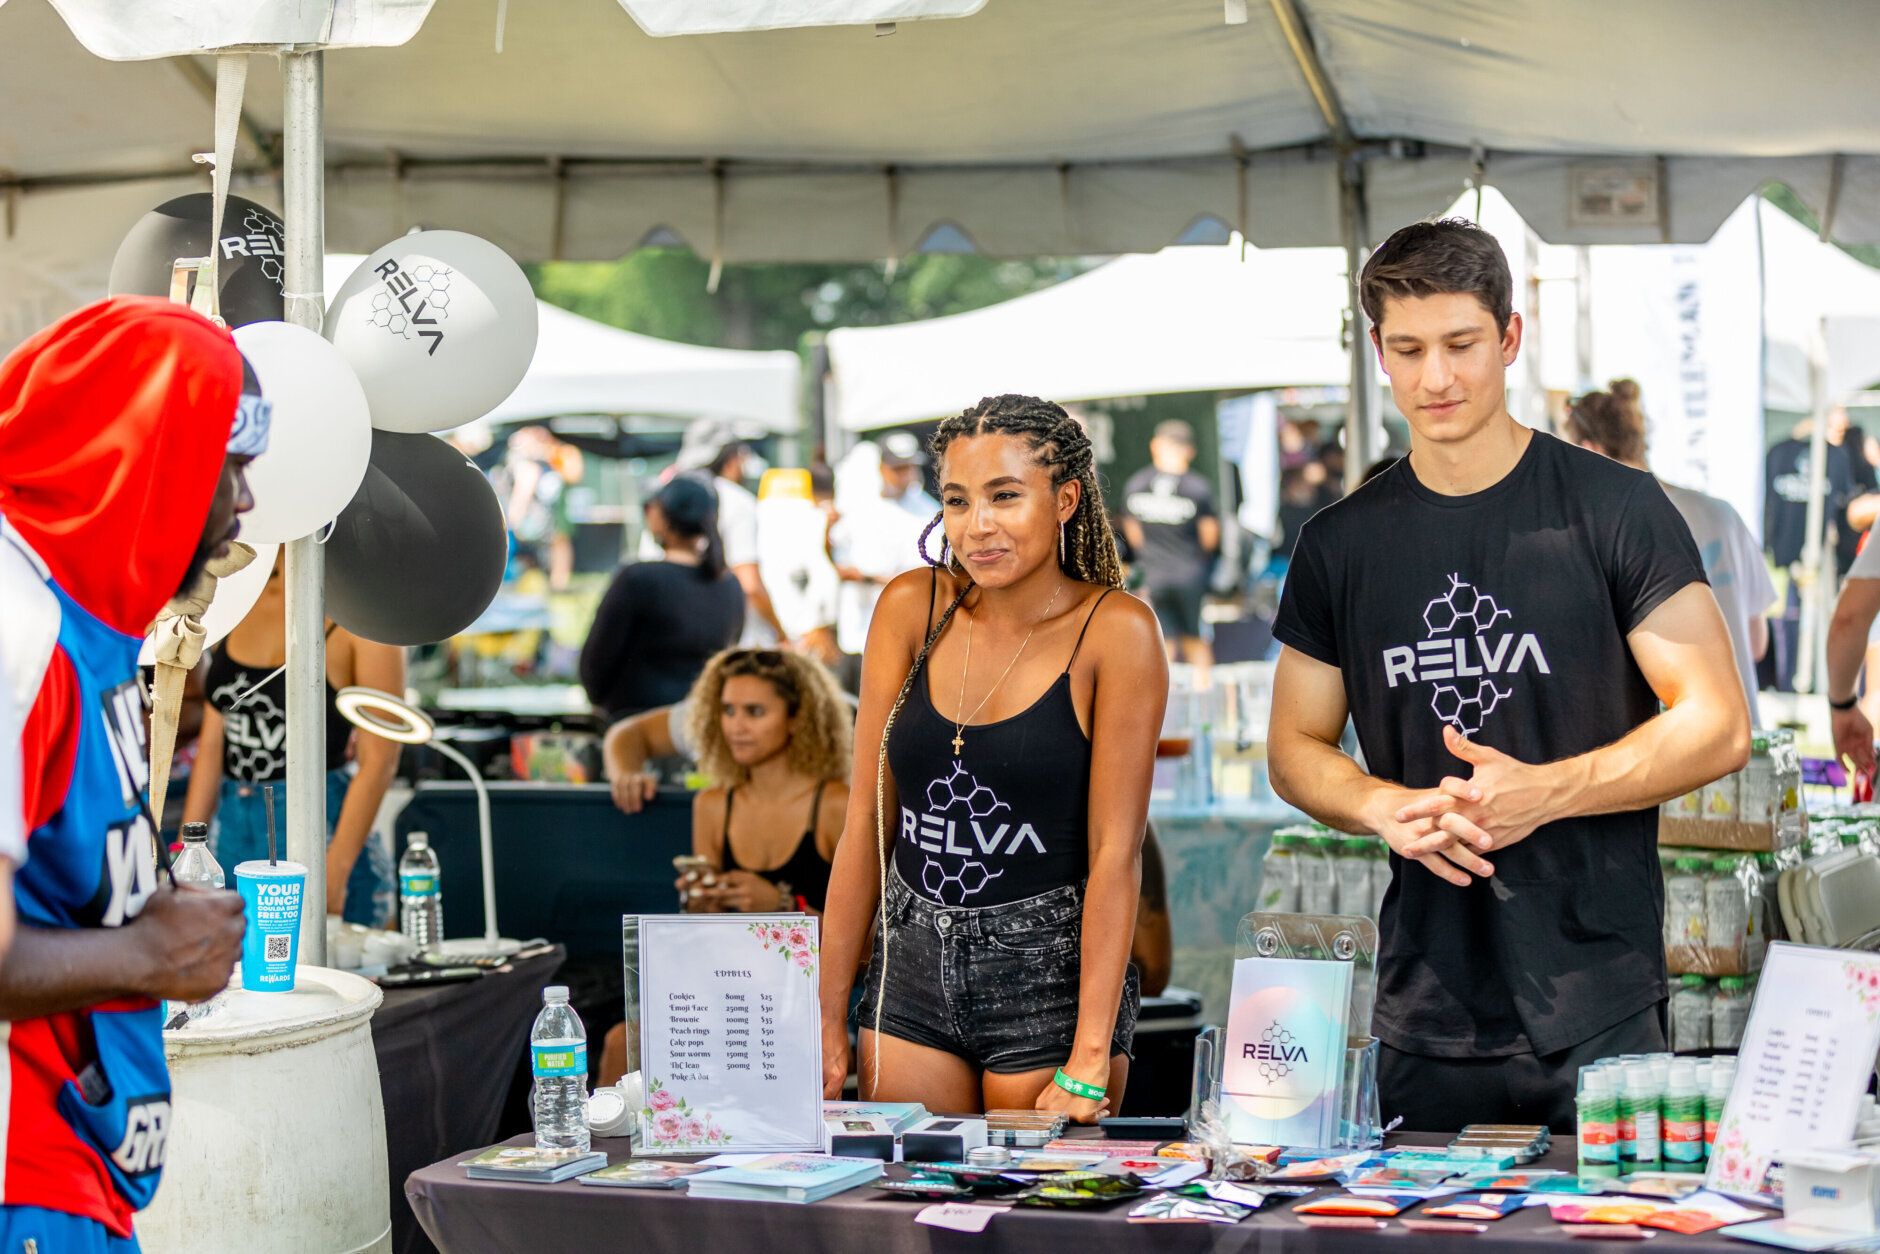 Companies and retailers view festival attendees as a viable target market as cannabis moves into the mainstream.